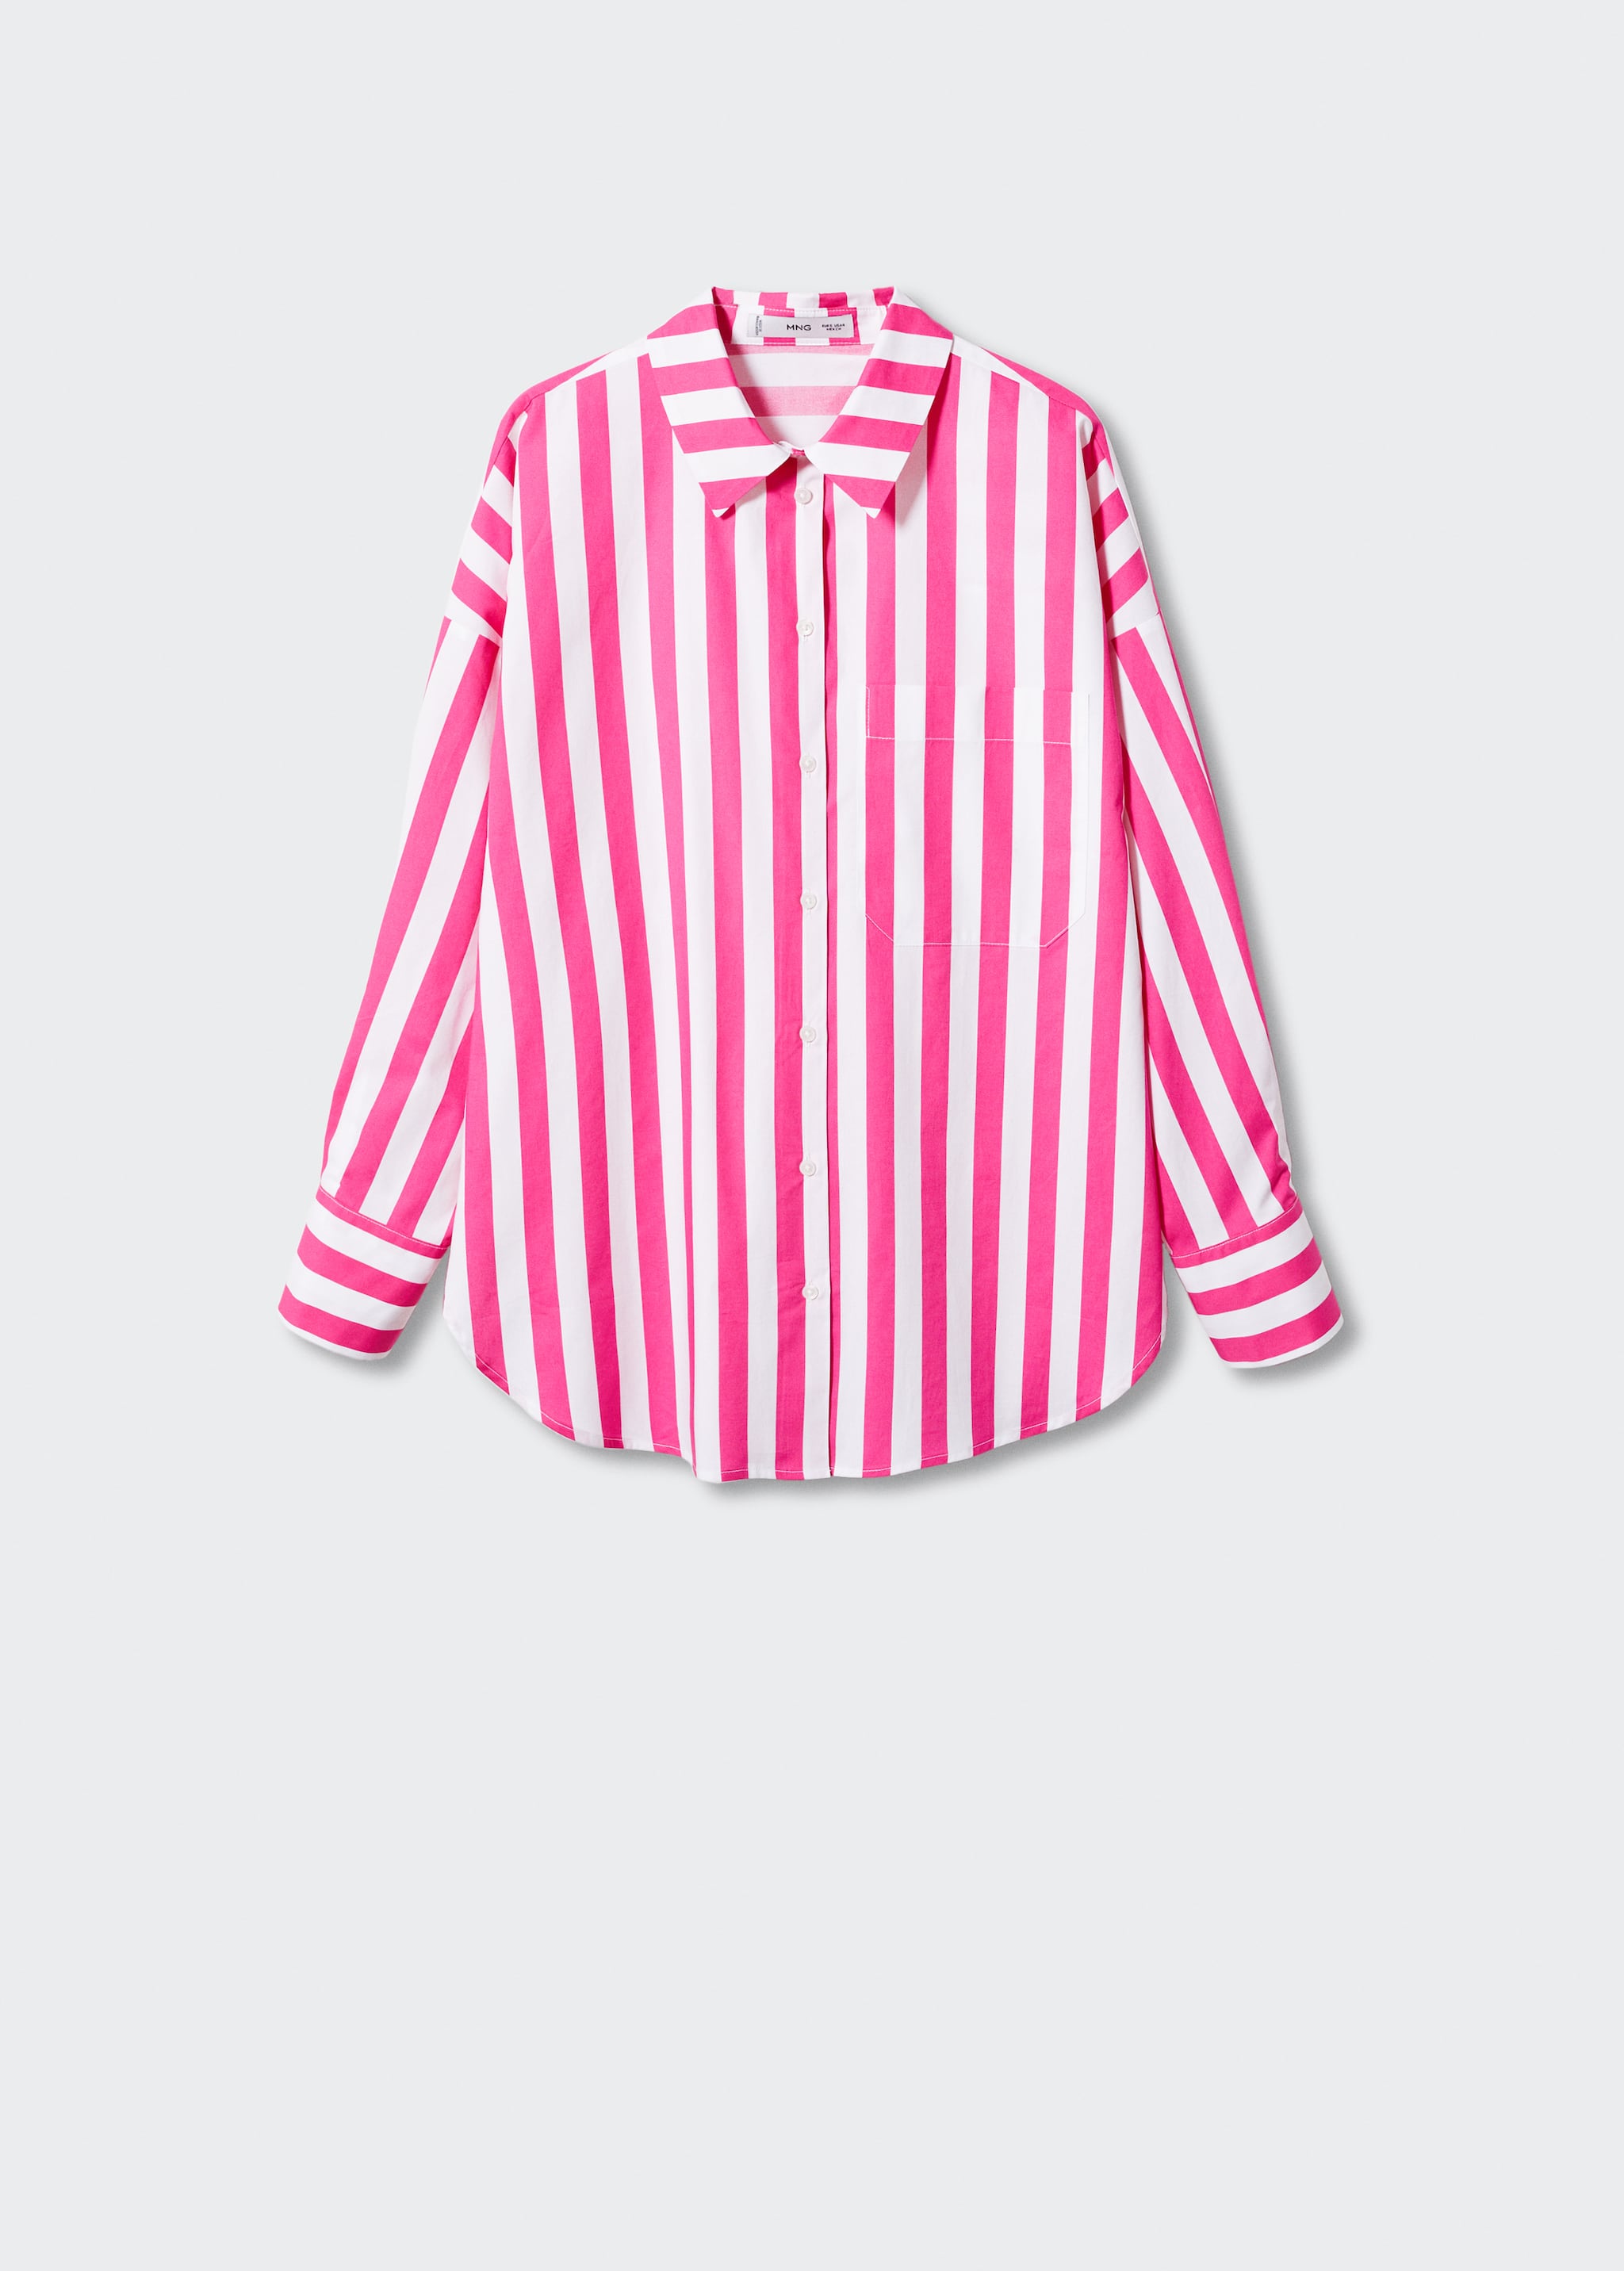 Oversize striped shirt - Article without model